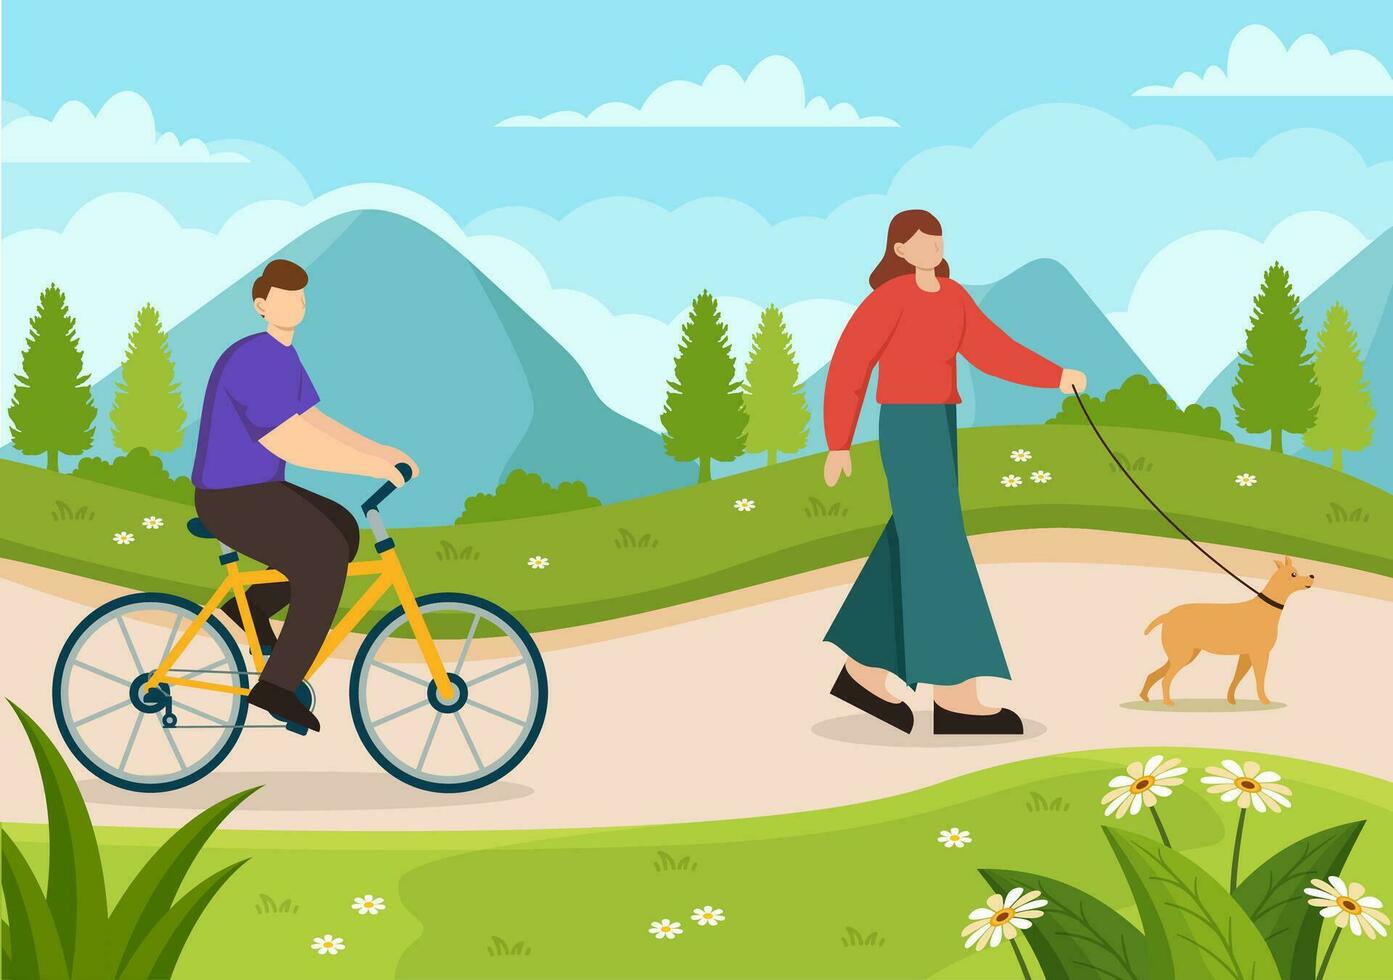 Outdoor Activity Vector Illustration with Relaxing on a Picnic, Leisure Activities at Weekend and Active Recreation in Flat Cartoon Background Design